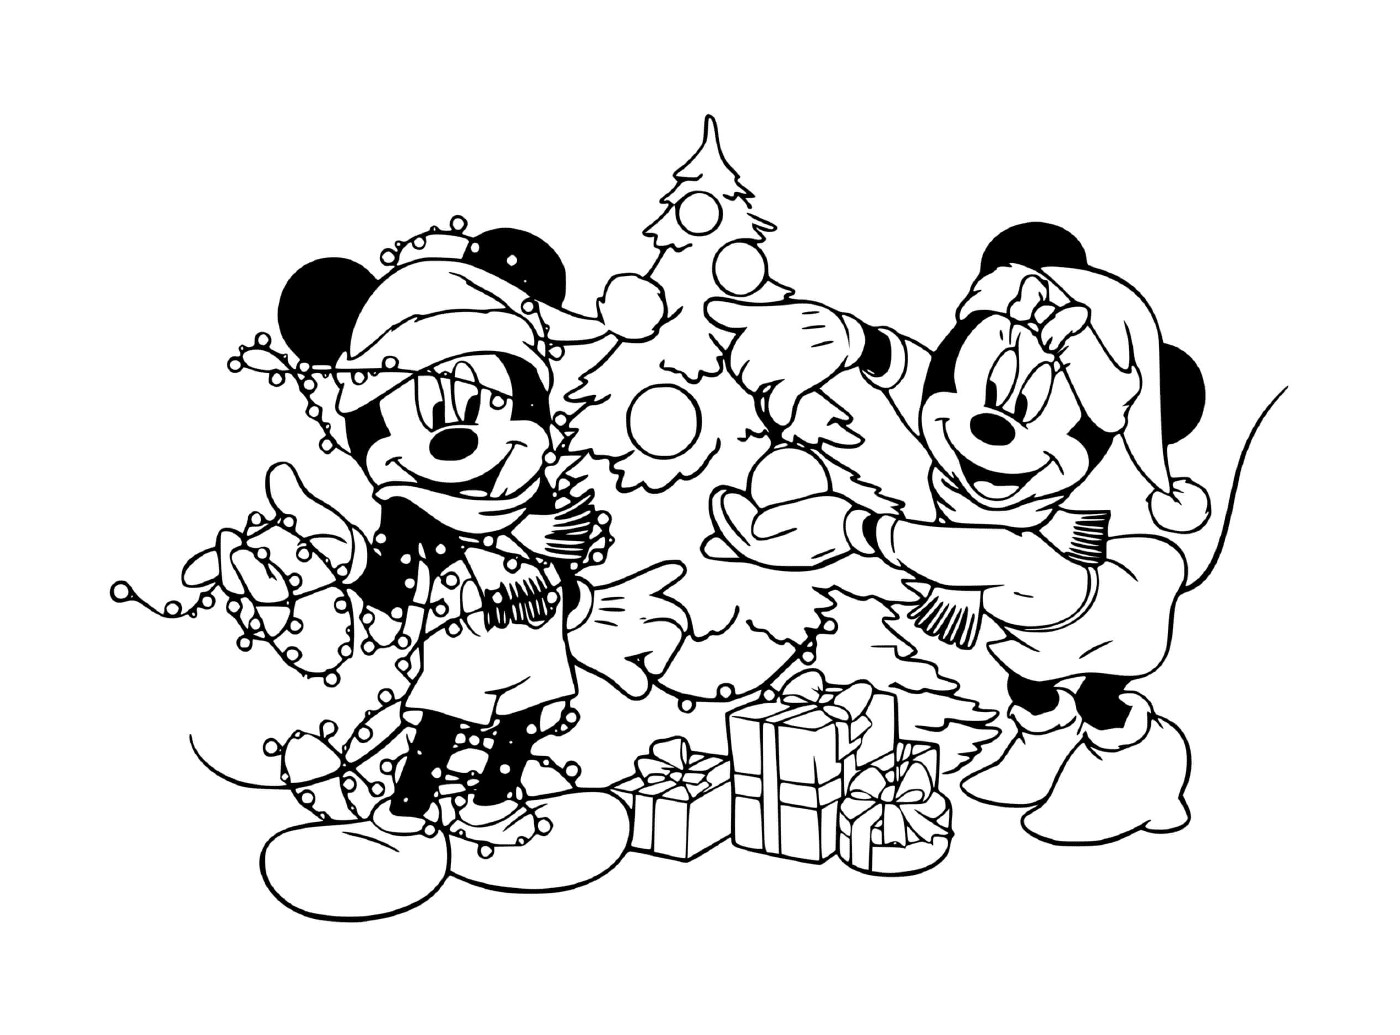  Mickey and Minnie decorate 